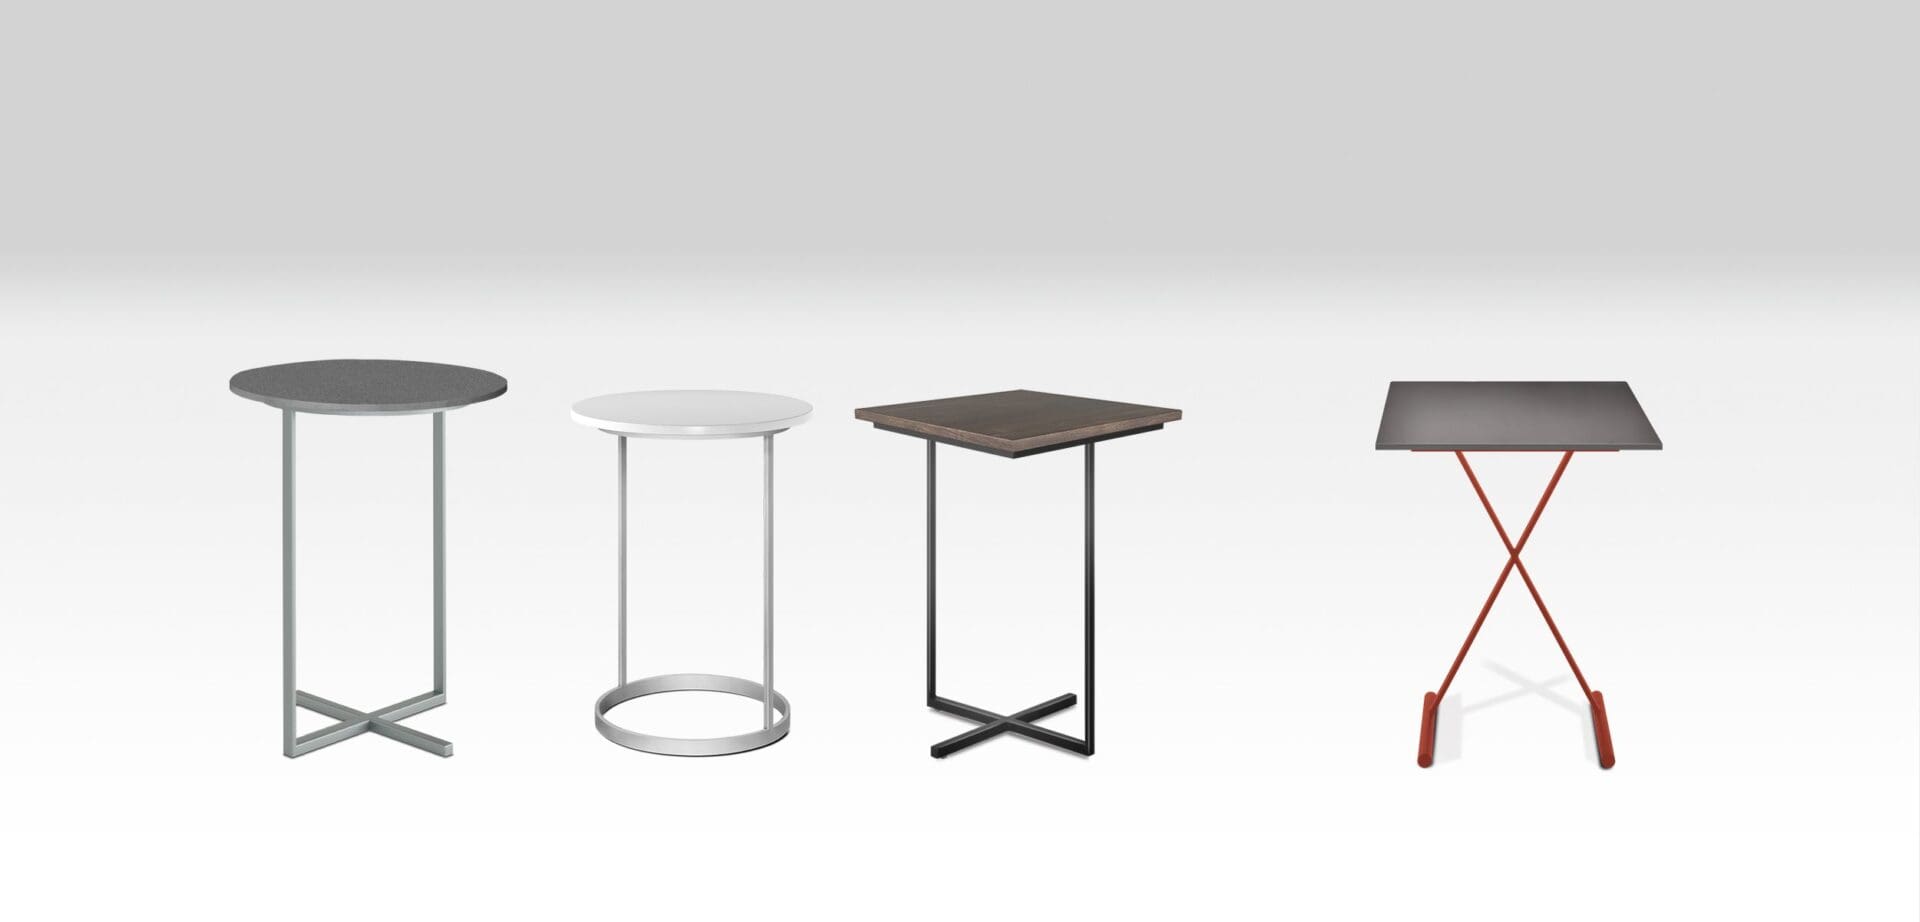 A group of tables that are sitting on top of each other.